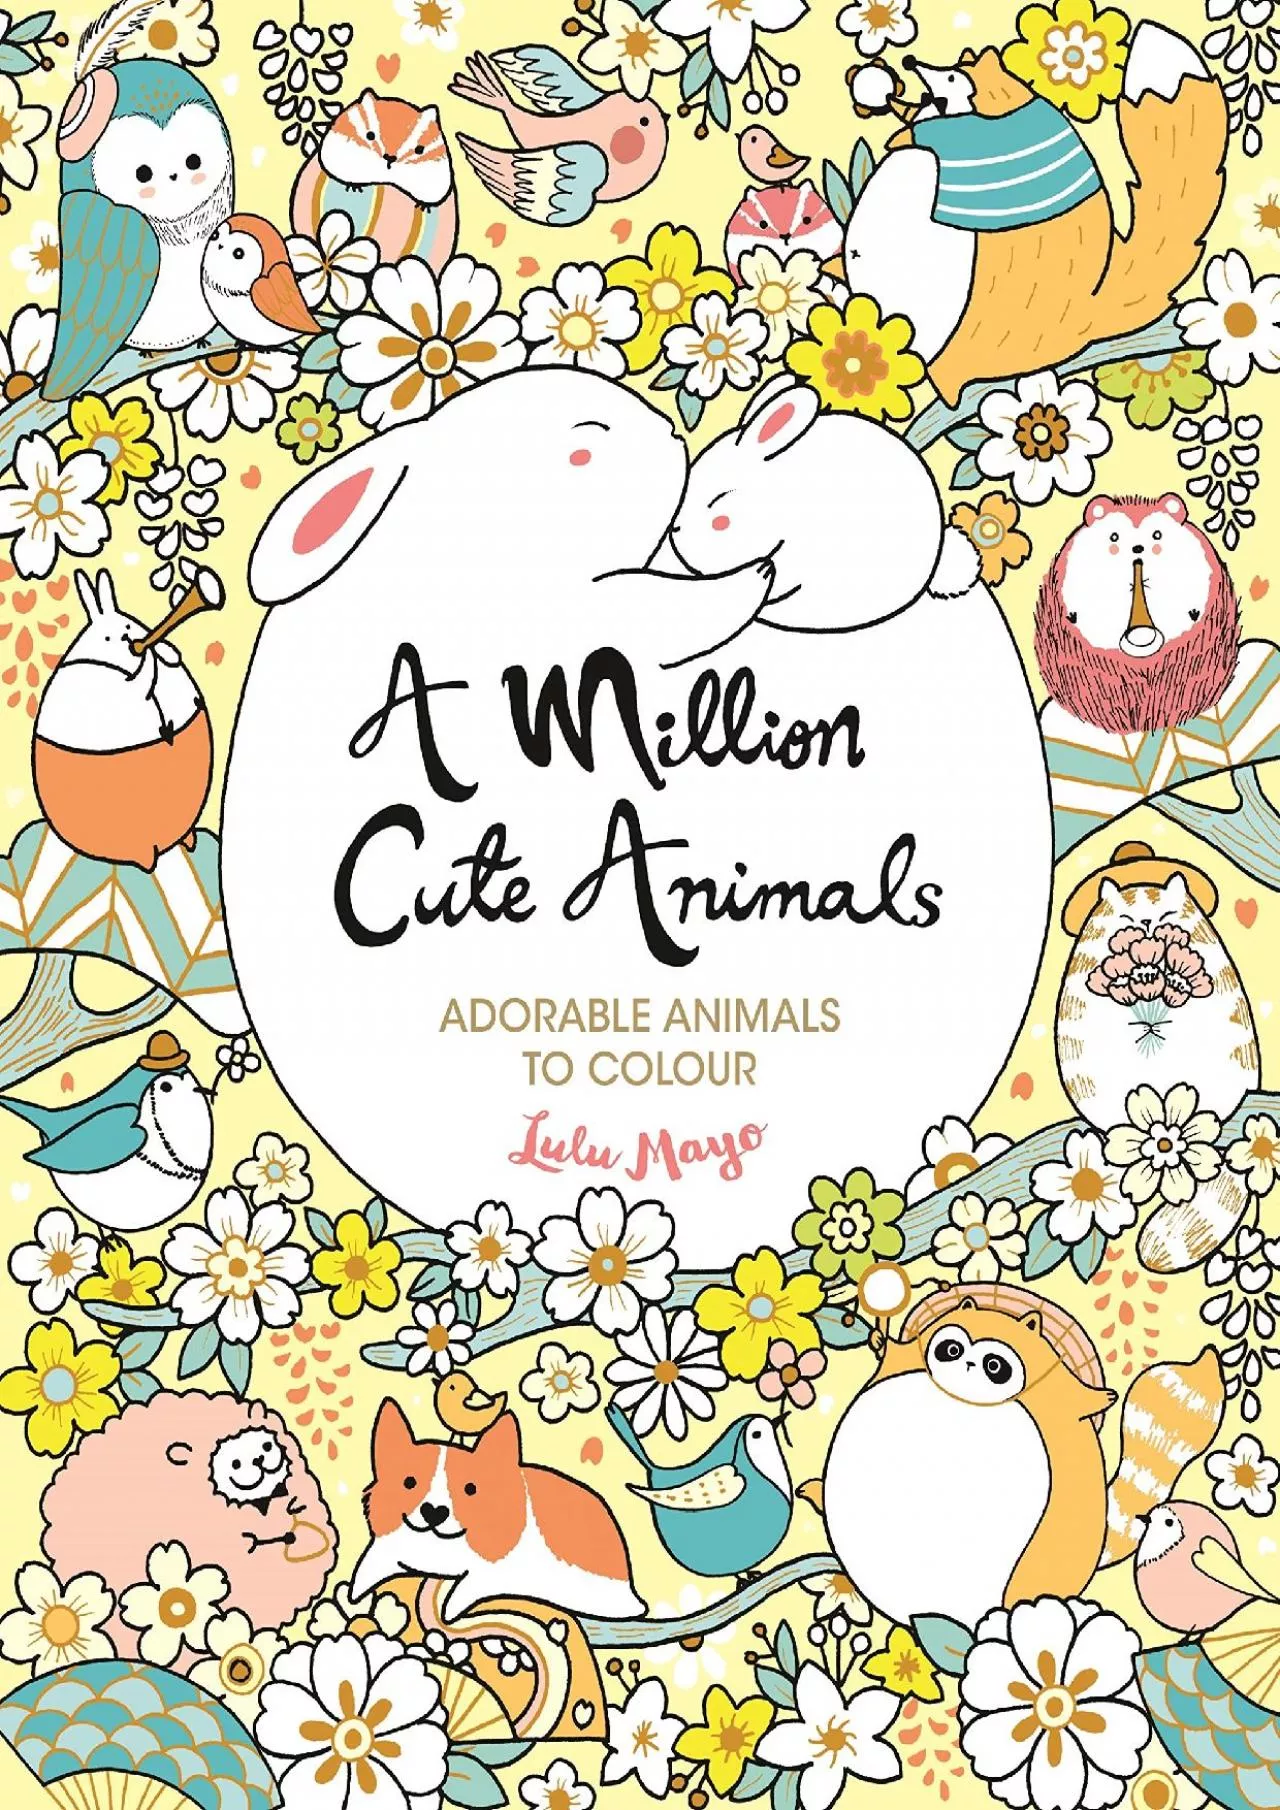 (DOWNLOAD)-A Million Cute Animals: Adorable Animals to Colour (A Million Creatures to